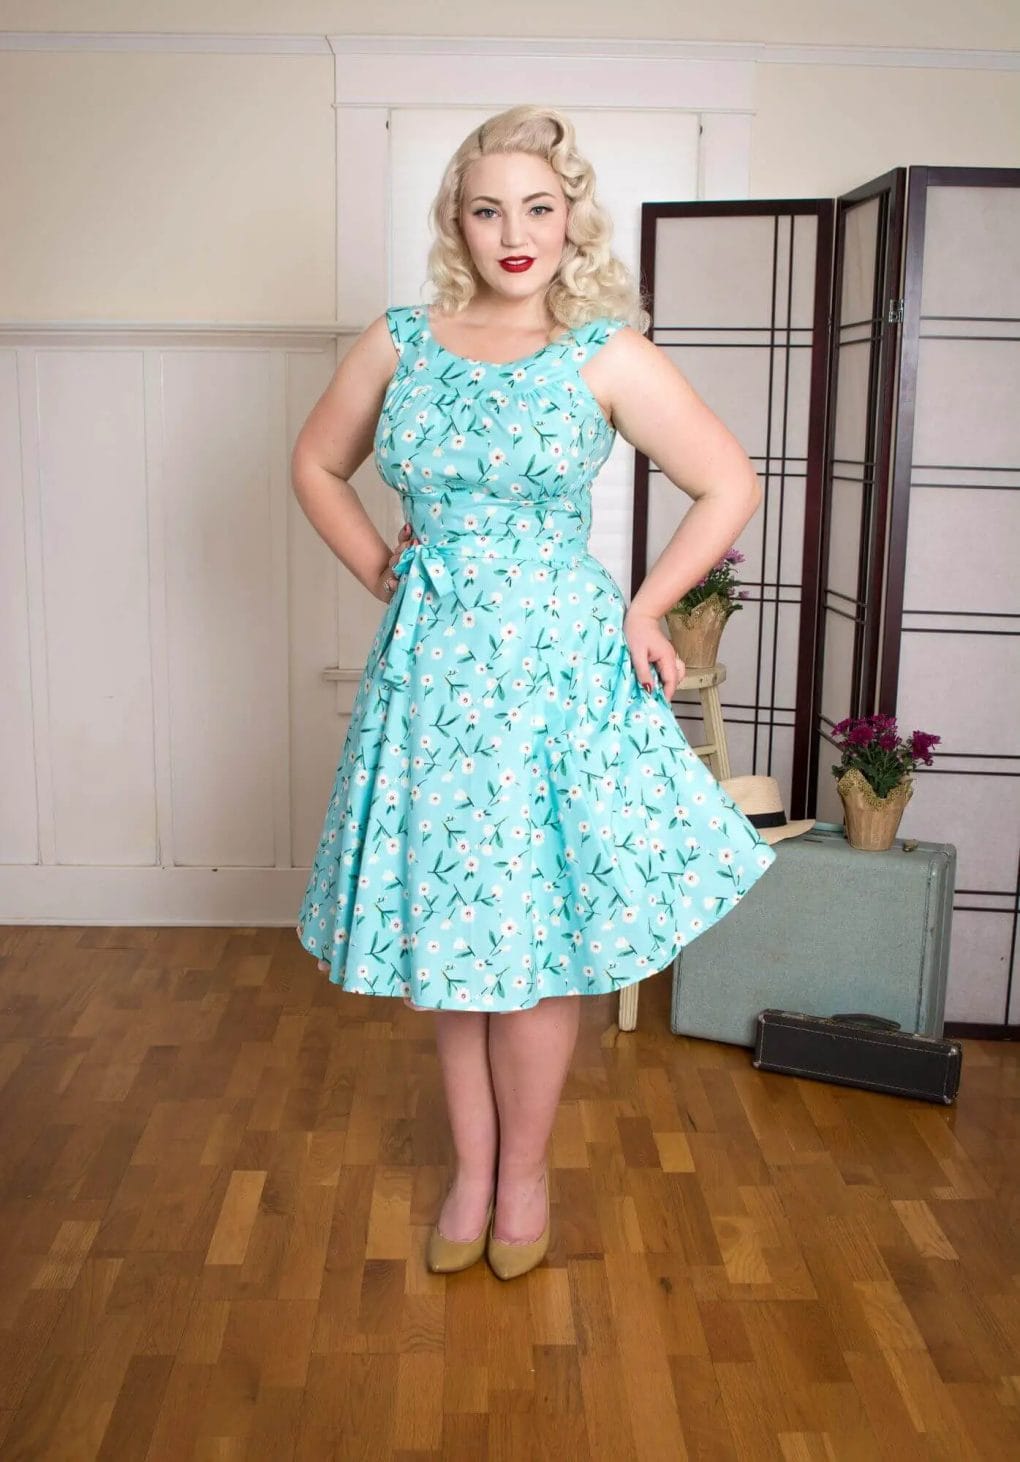 One could argue these dresses are a bit pricey nowadays, as the style is popular and the demand is high, but if you look in the right places, you will find outstanding ladies retro dresses for a lower price.